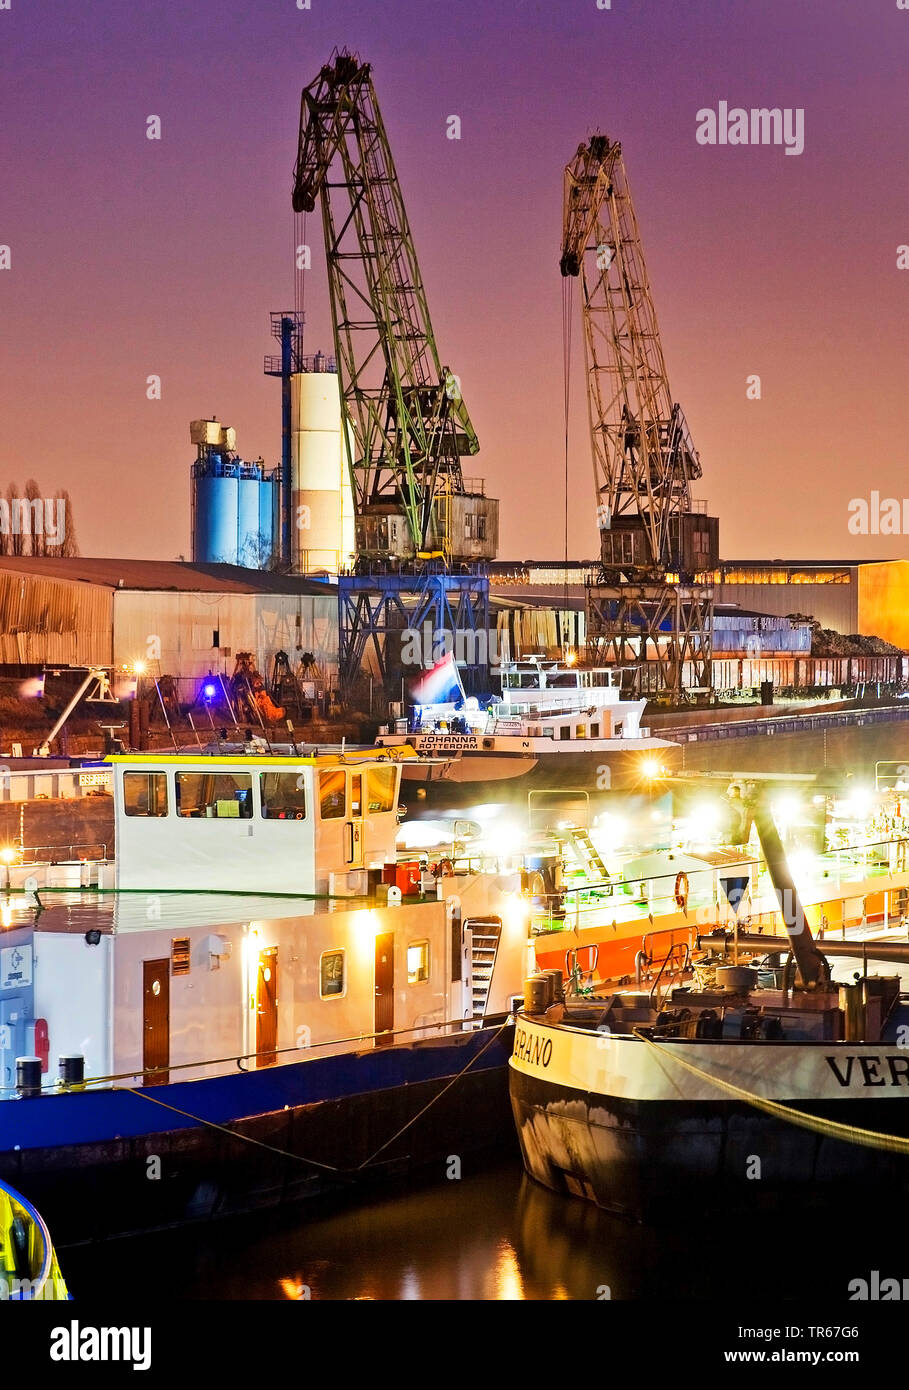 freight ships and cranes in inland port Duisburg at night, Germany, North Rhine-Westphalia, Ruhr Area, Duisburg Stock Photo